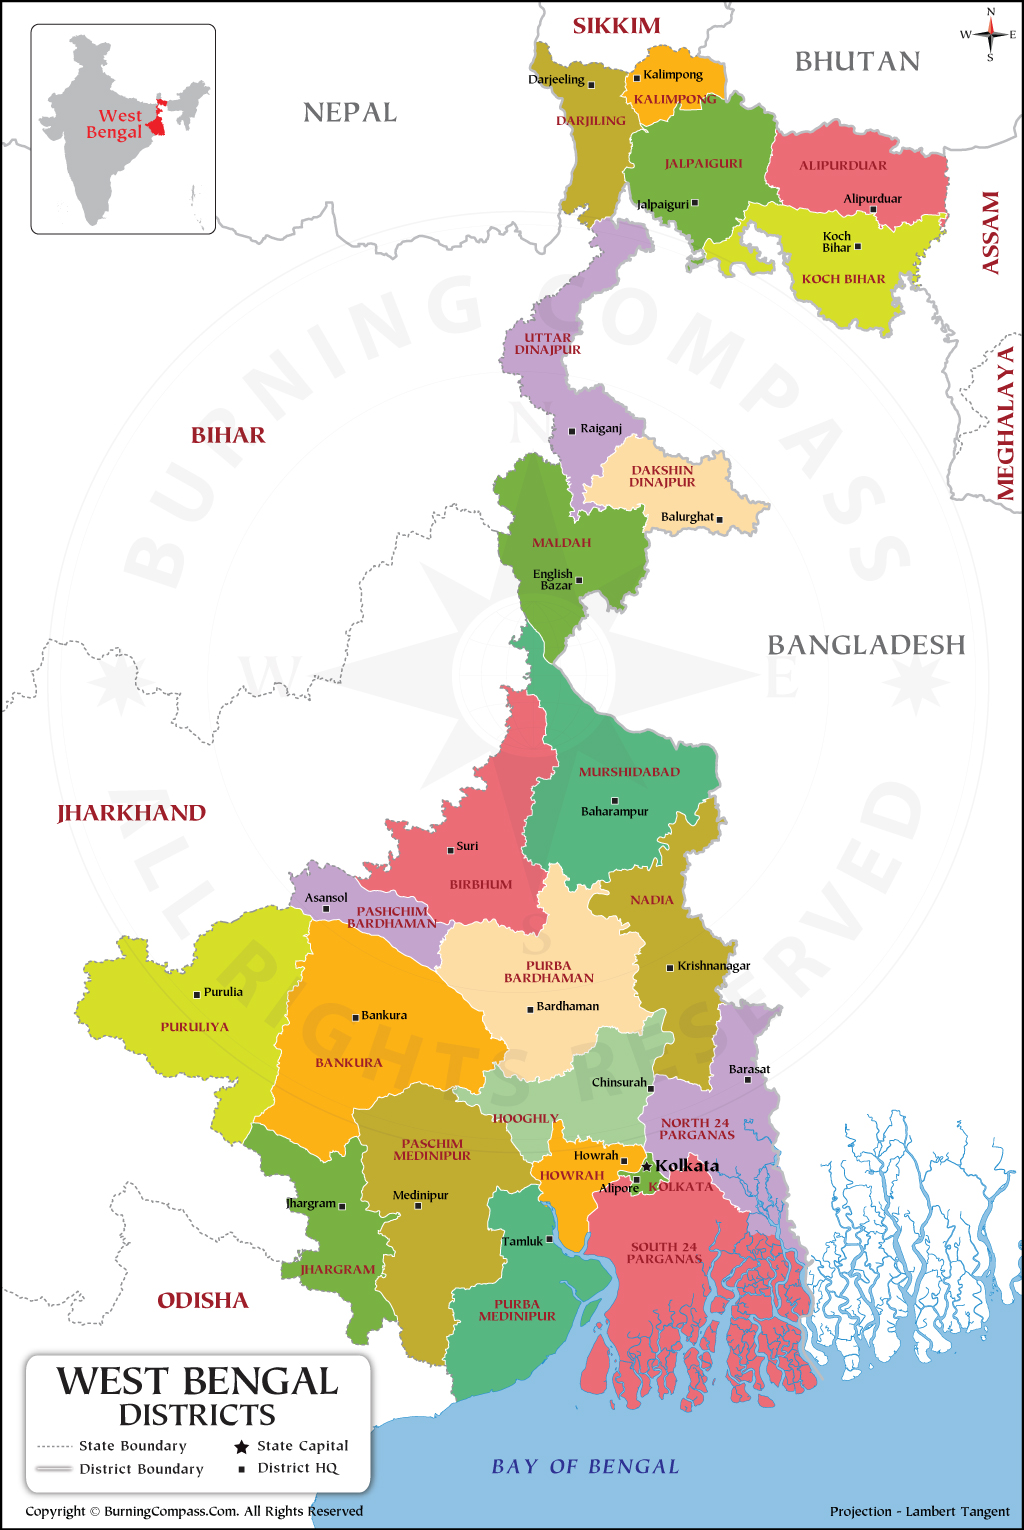 7-new-districts-in-west-benga-mamata-banerjee-announced